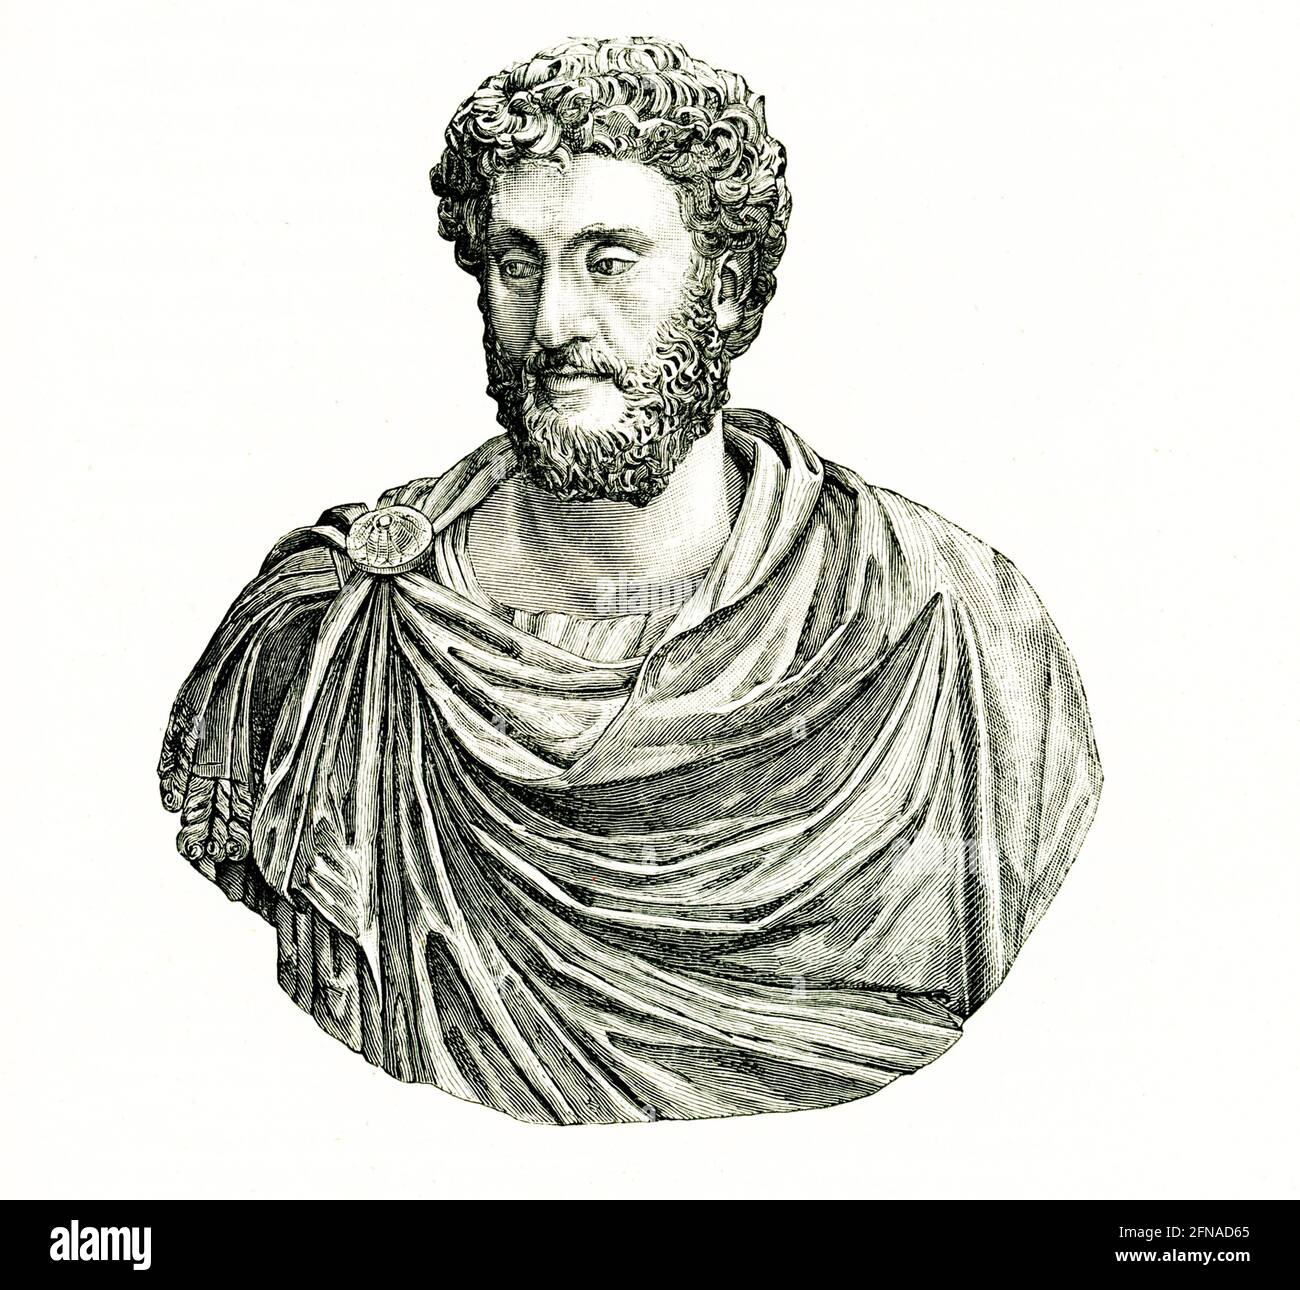 This illustration shows a marble bust ofthe Roman emperor Commodus that was found at Ostia and is housed in the Vatican Museum. Commodus was Roman emperor jointly with his father Marcus Aurelius from 176 until his father's death in 180, and solely until 192. His reign is commonly considered to mark the end of the golden period of peace in the history of the Roman Empire known as the Pax Romana. Stock Photo